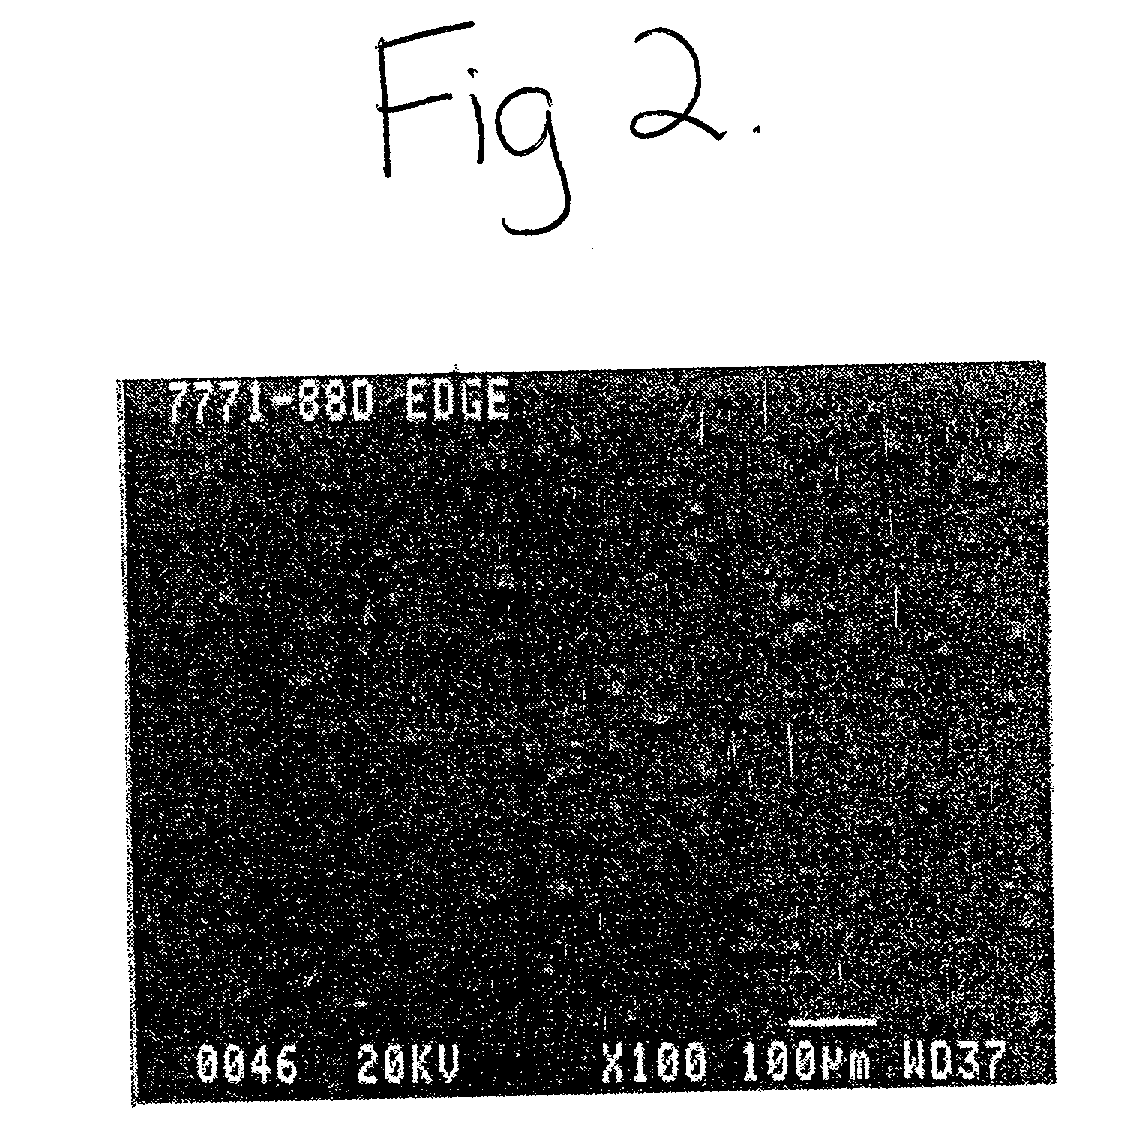 Dispersible dielectric particles and methods of forming the same